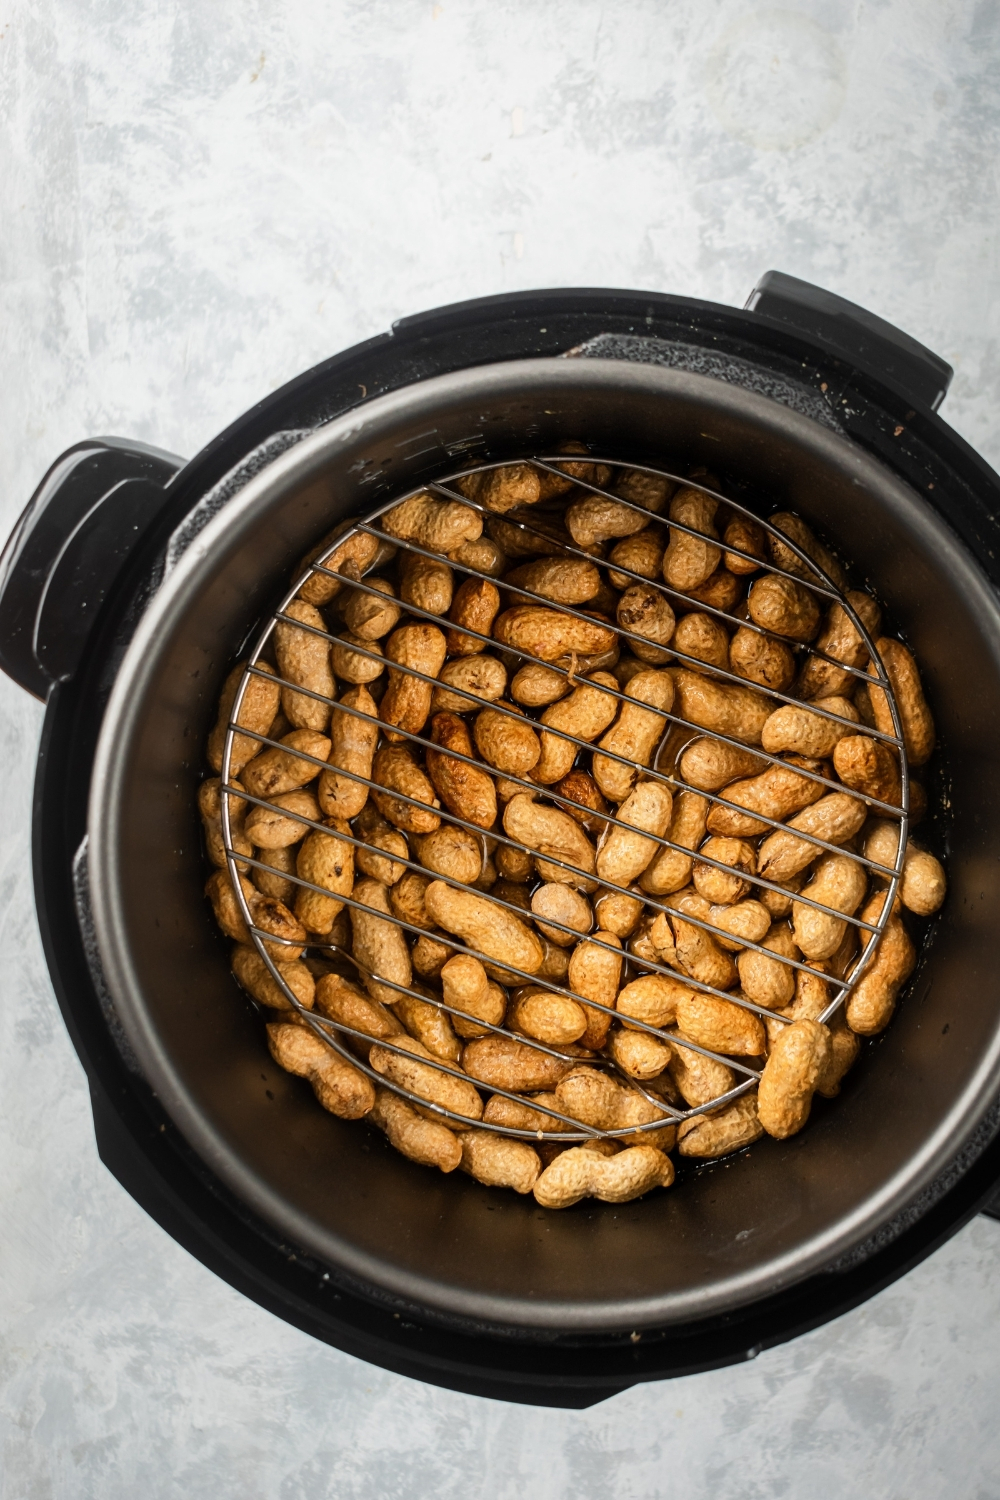 Shelled peanuts in an instant pot with wire rack on them.